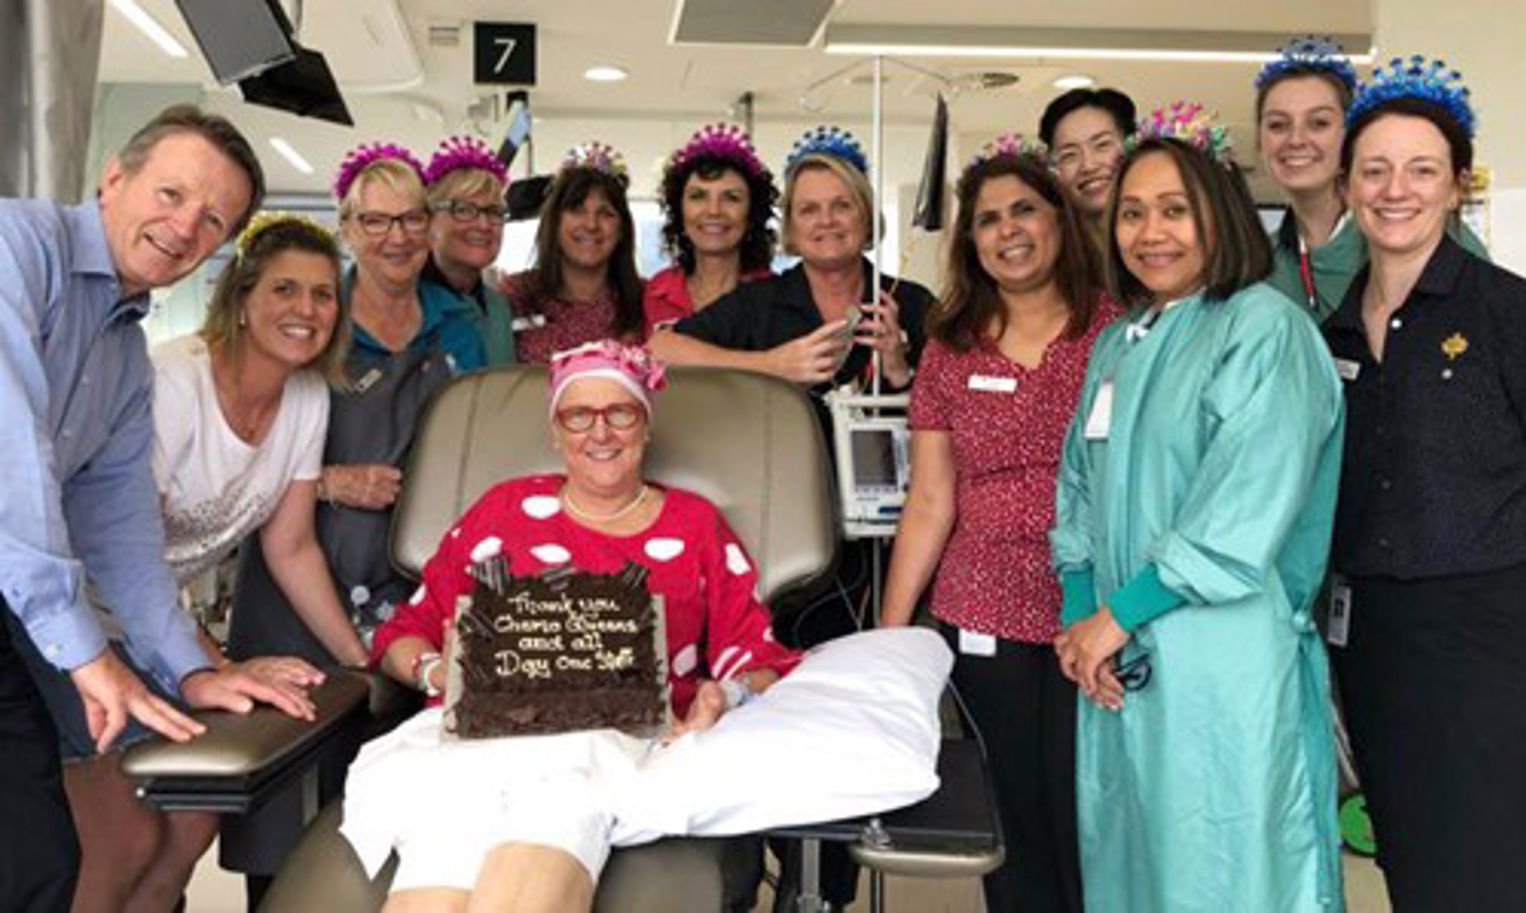 Maryanne sitting in chemo chair with nurses gathered around. She's holding a cake that says 'thank you chemo queens and all day one staff'